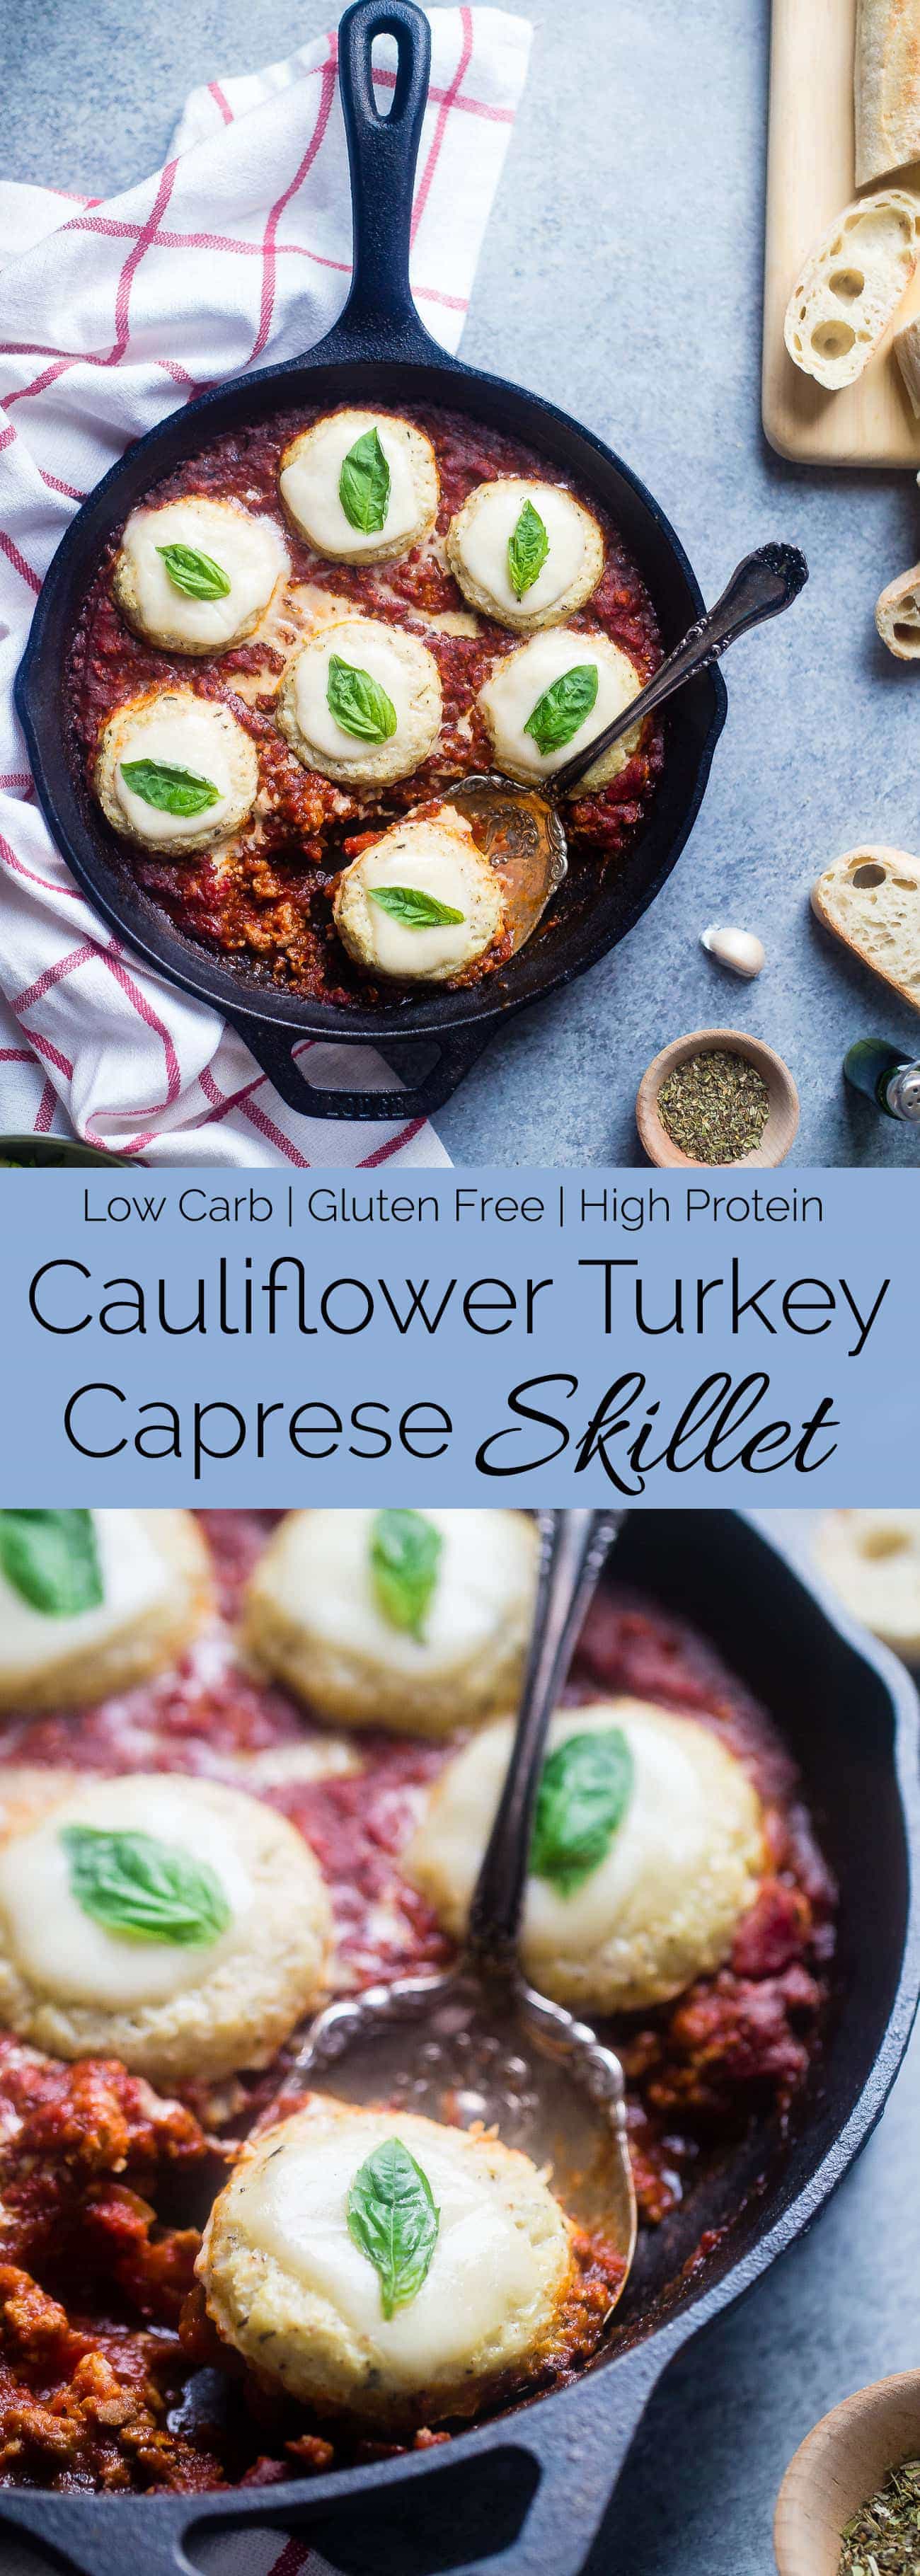 Cauliflower Caprese Skillet - These gluten free skillet has all the Italian flavors of the classic salad, in a light, healthy and low carb dinner that everyone will love! | Foodfaithfitness.com | @FoodFaithFit